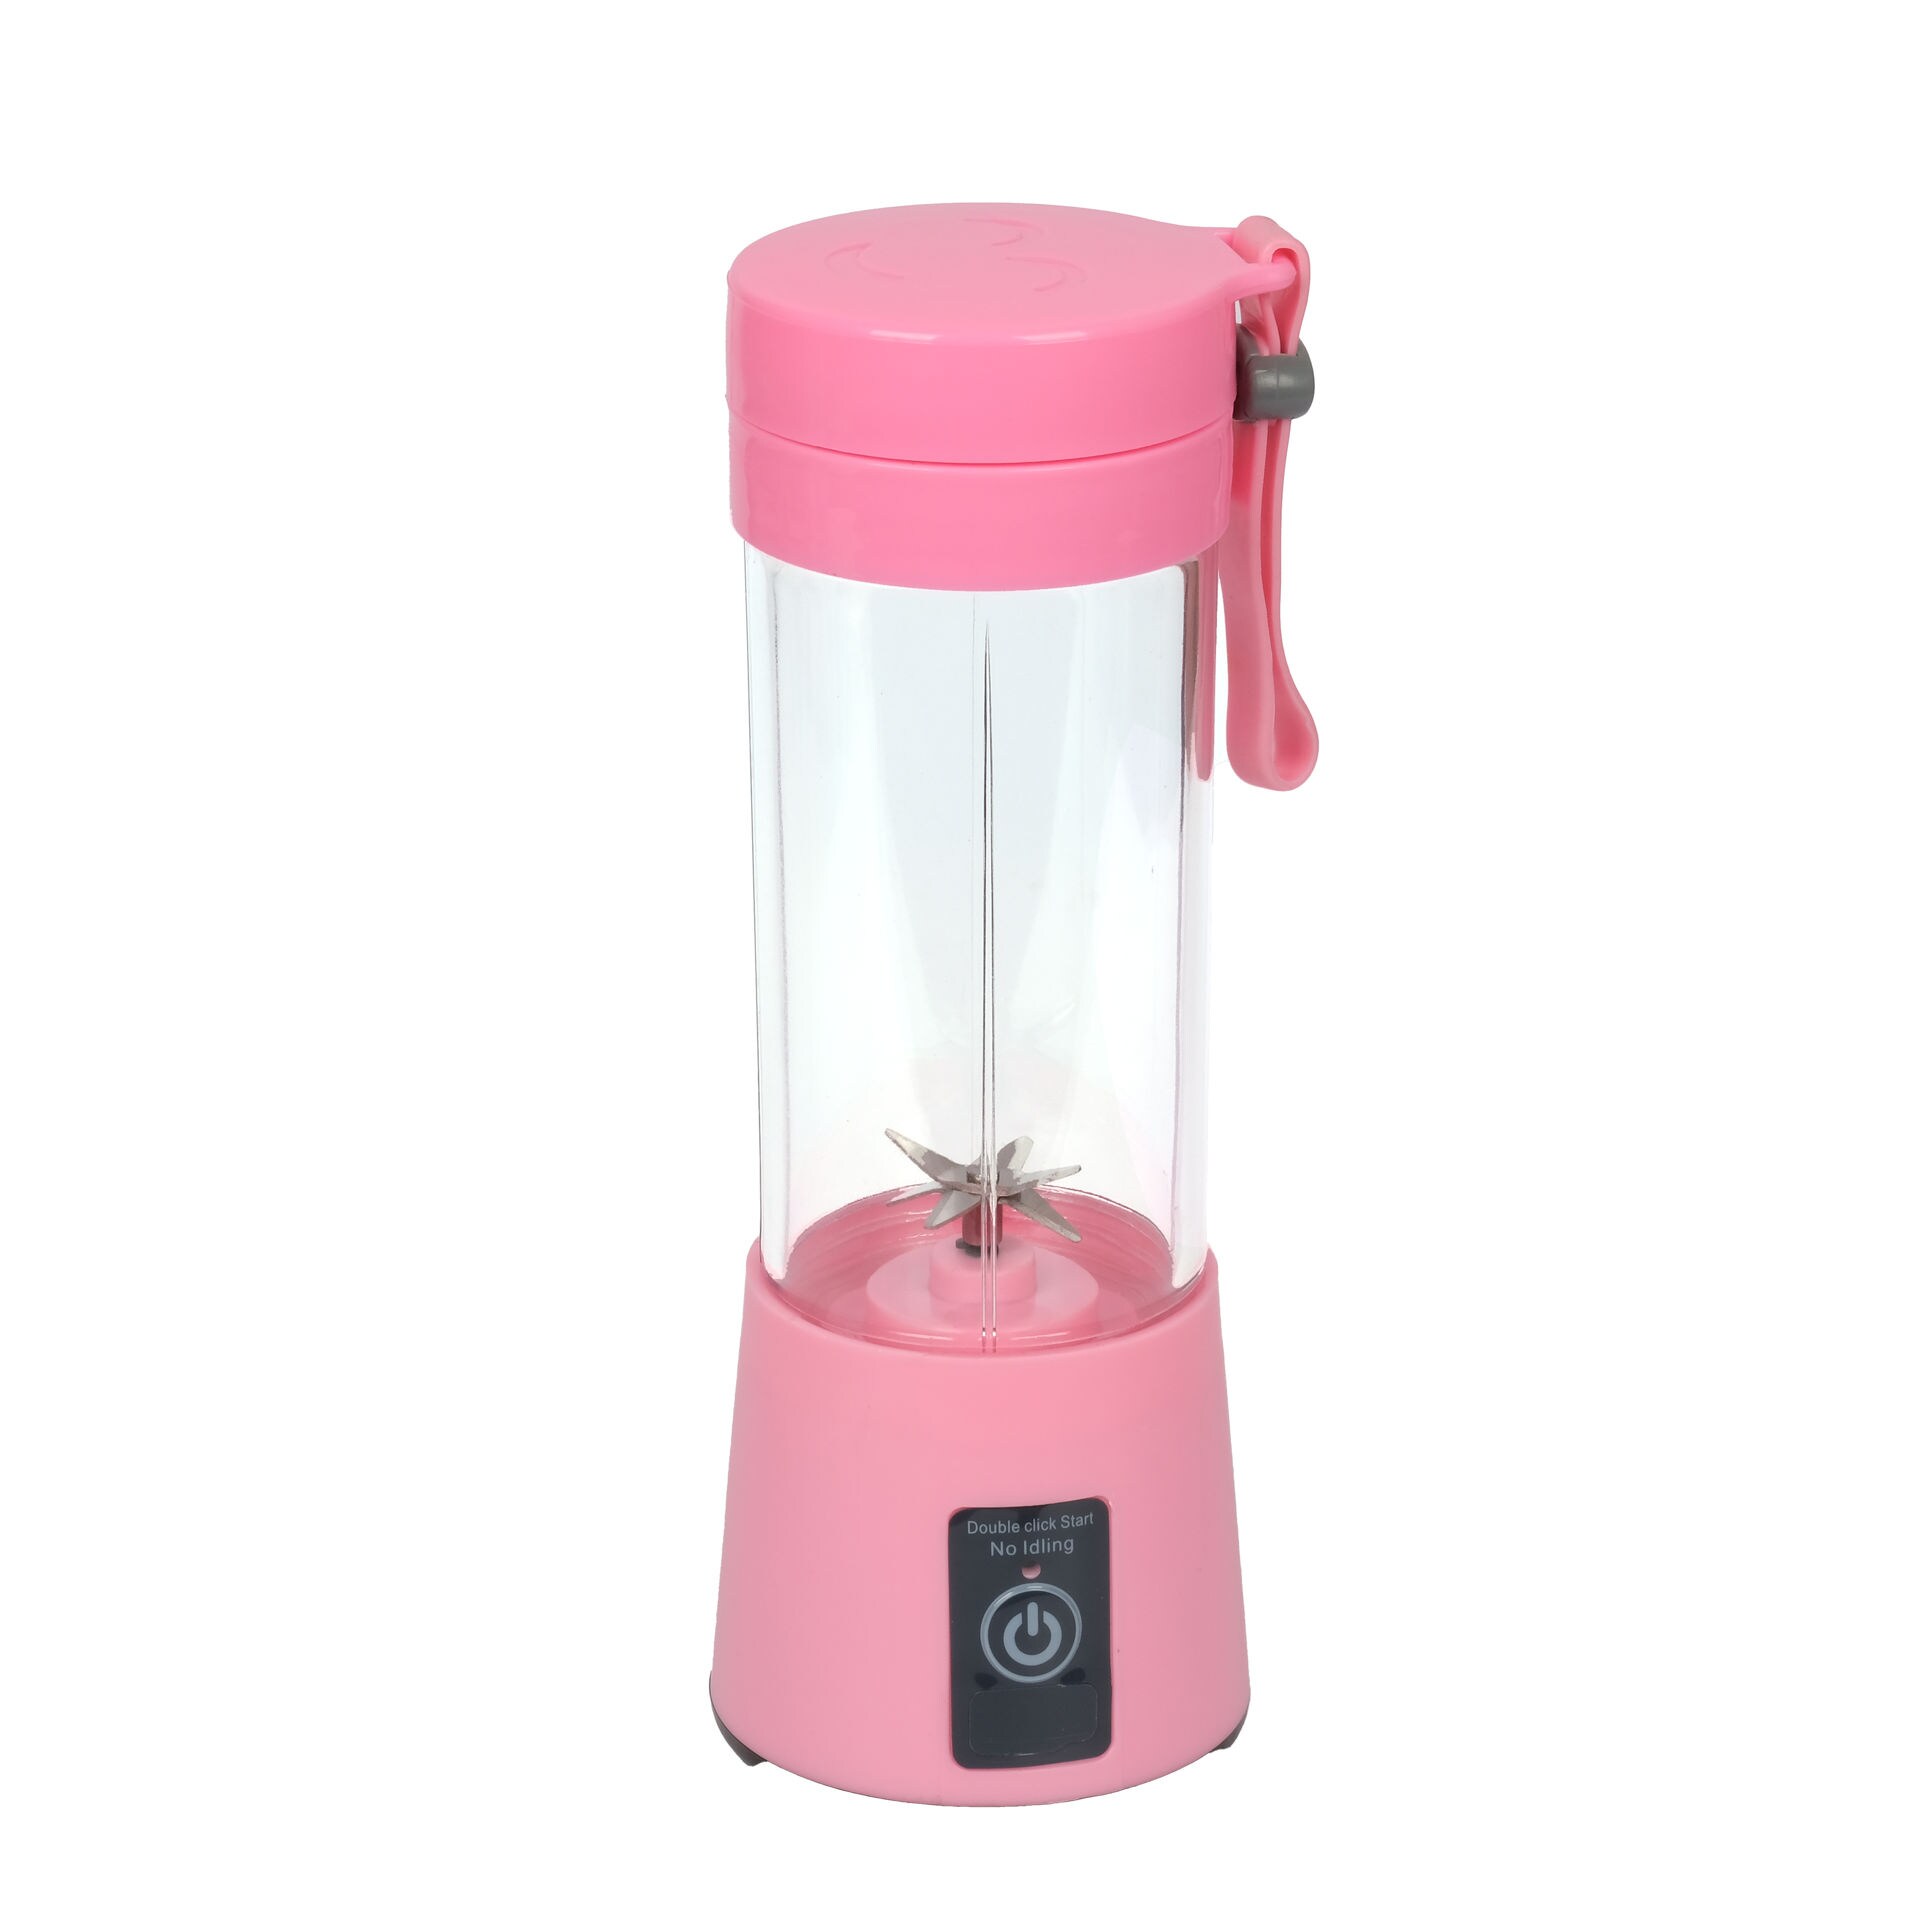 https://assets.dragonmart.ae//pictures/0623388_rechargeable-and-portable-juice-blender-380ml-pink.jpeg